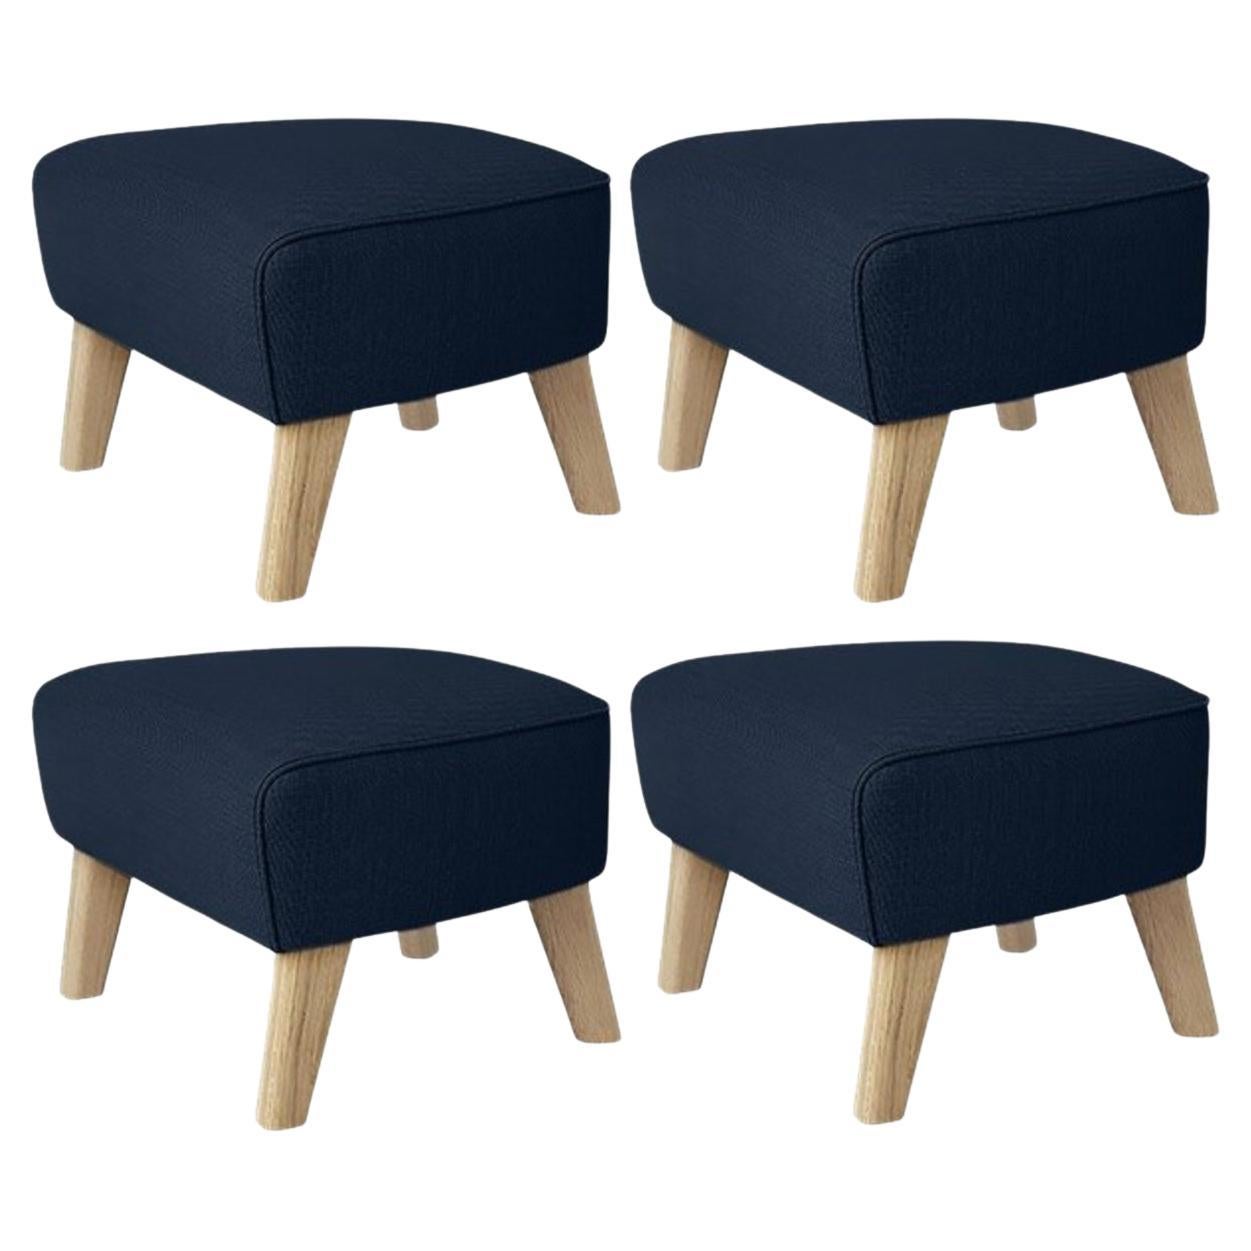 Set of 4 Blue and Natural Oak Sahco Zero Footstool by Lassen